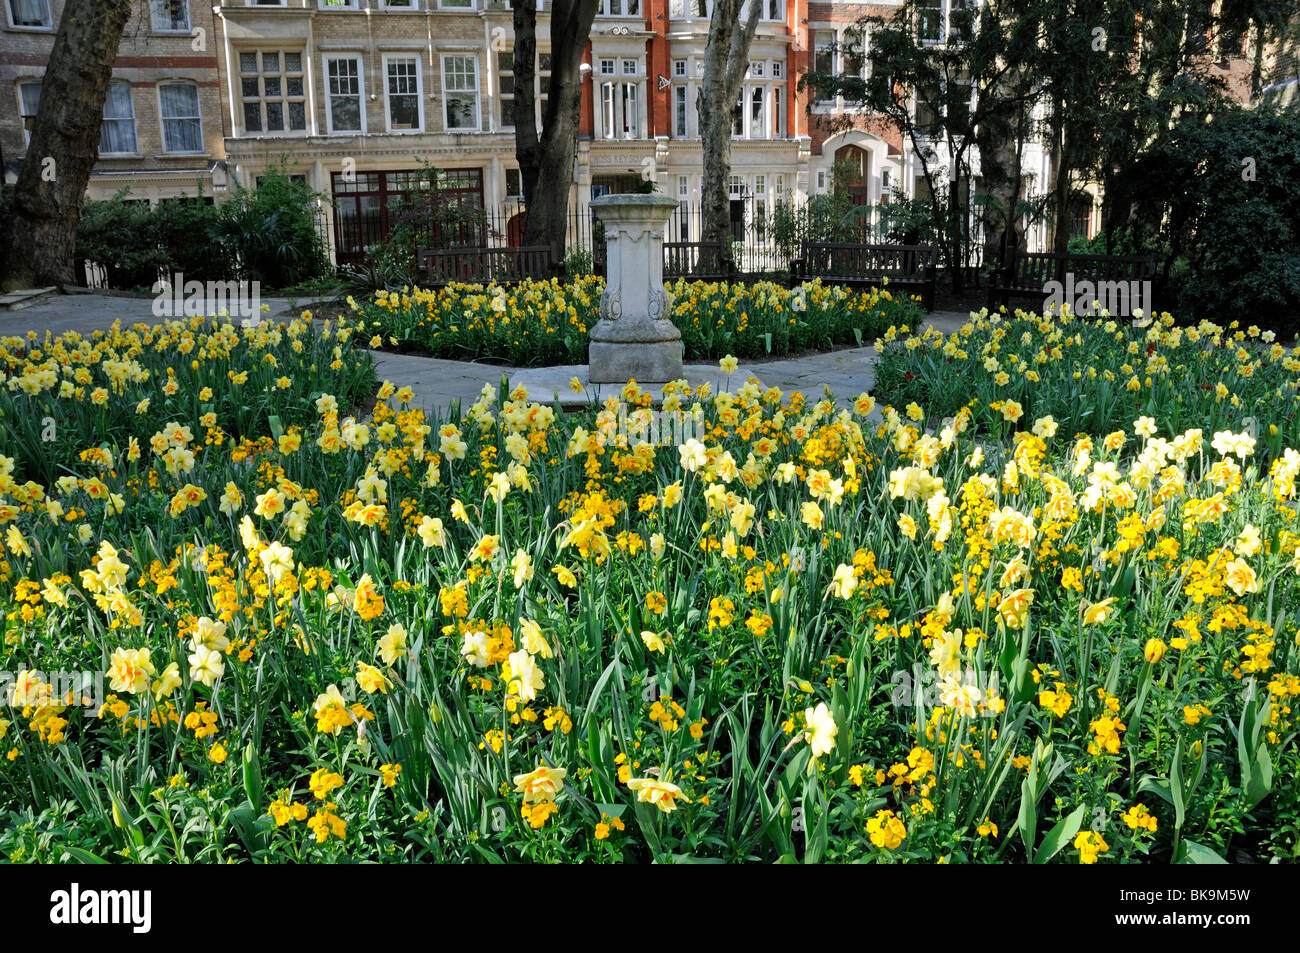 Daffodils and Wallflowers in flower beds Postman's Park City of London England Britain UK Stock Photo